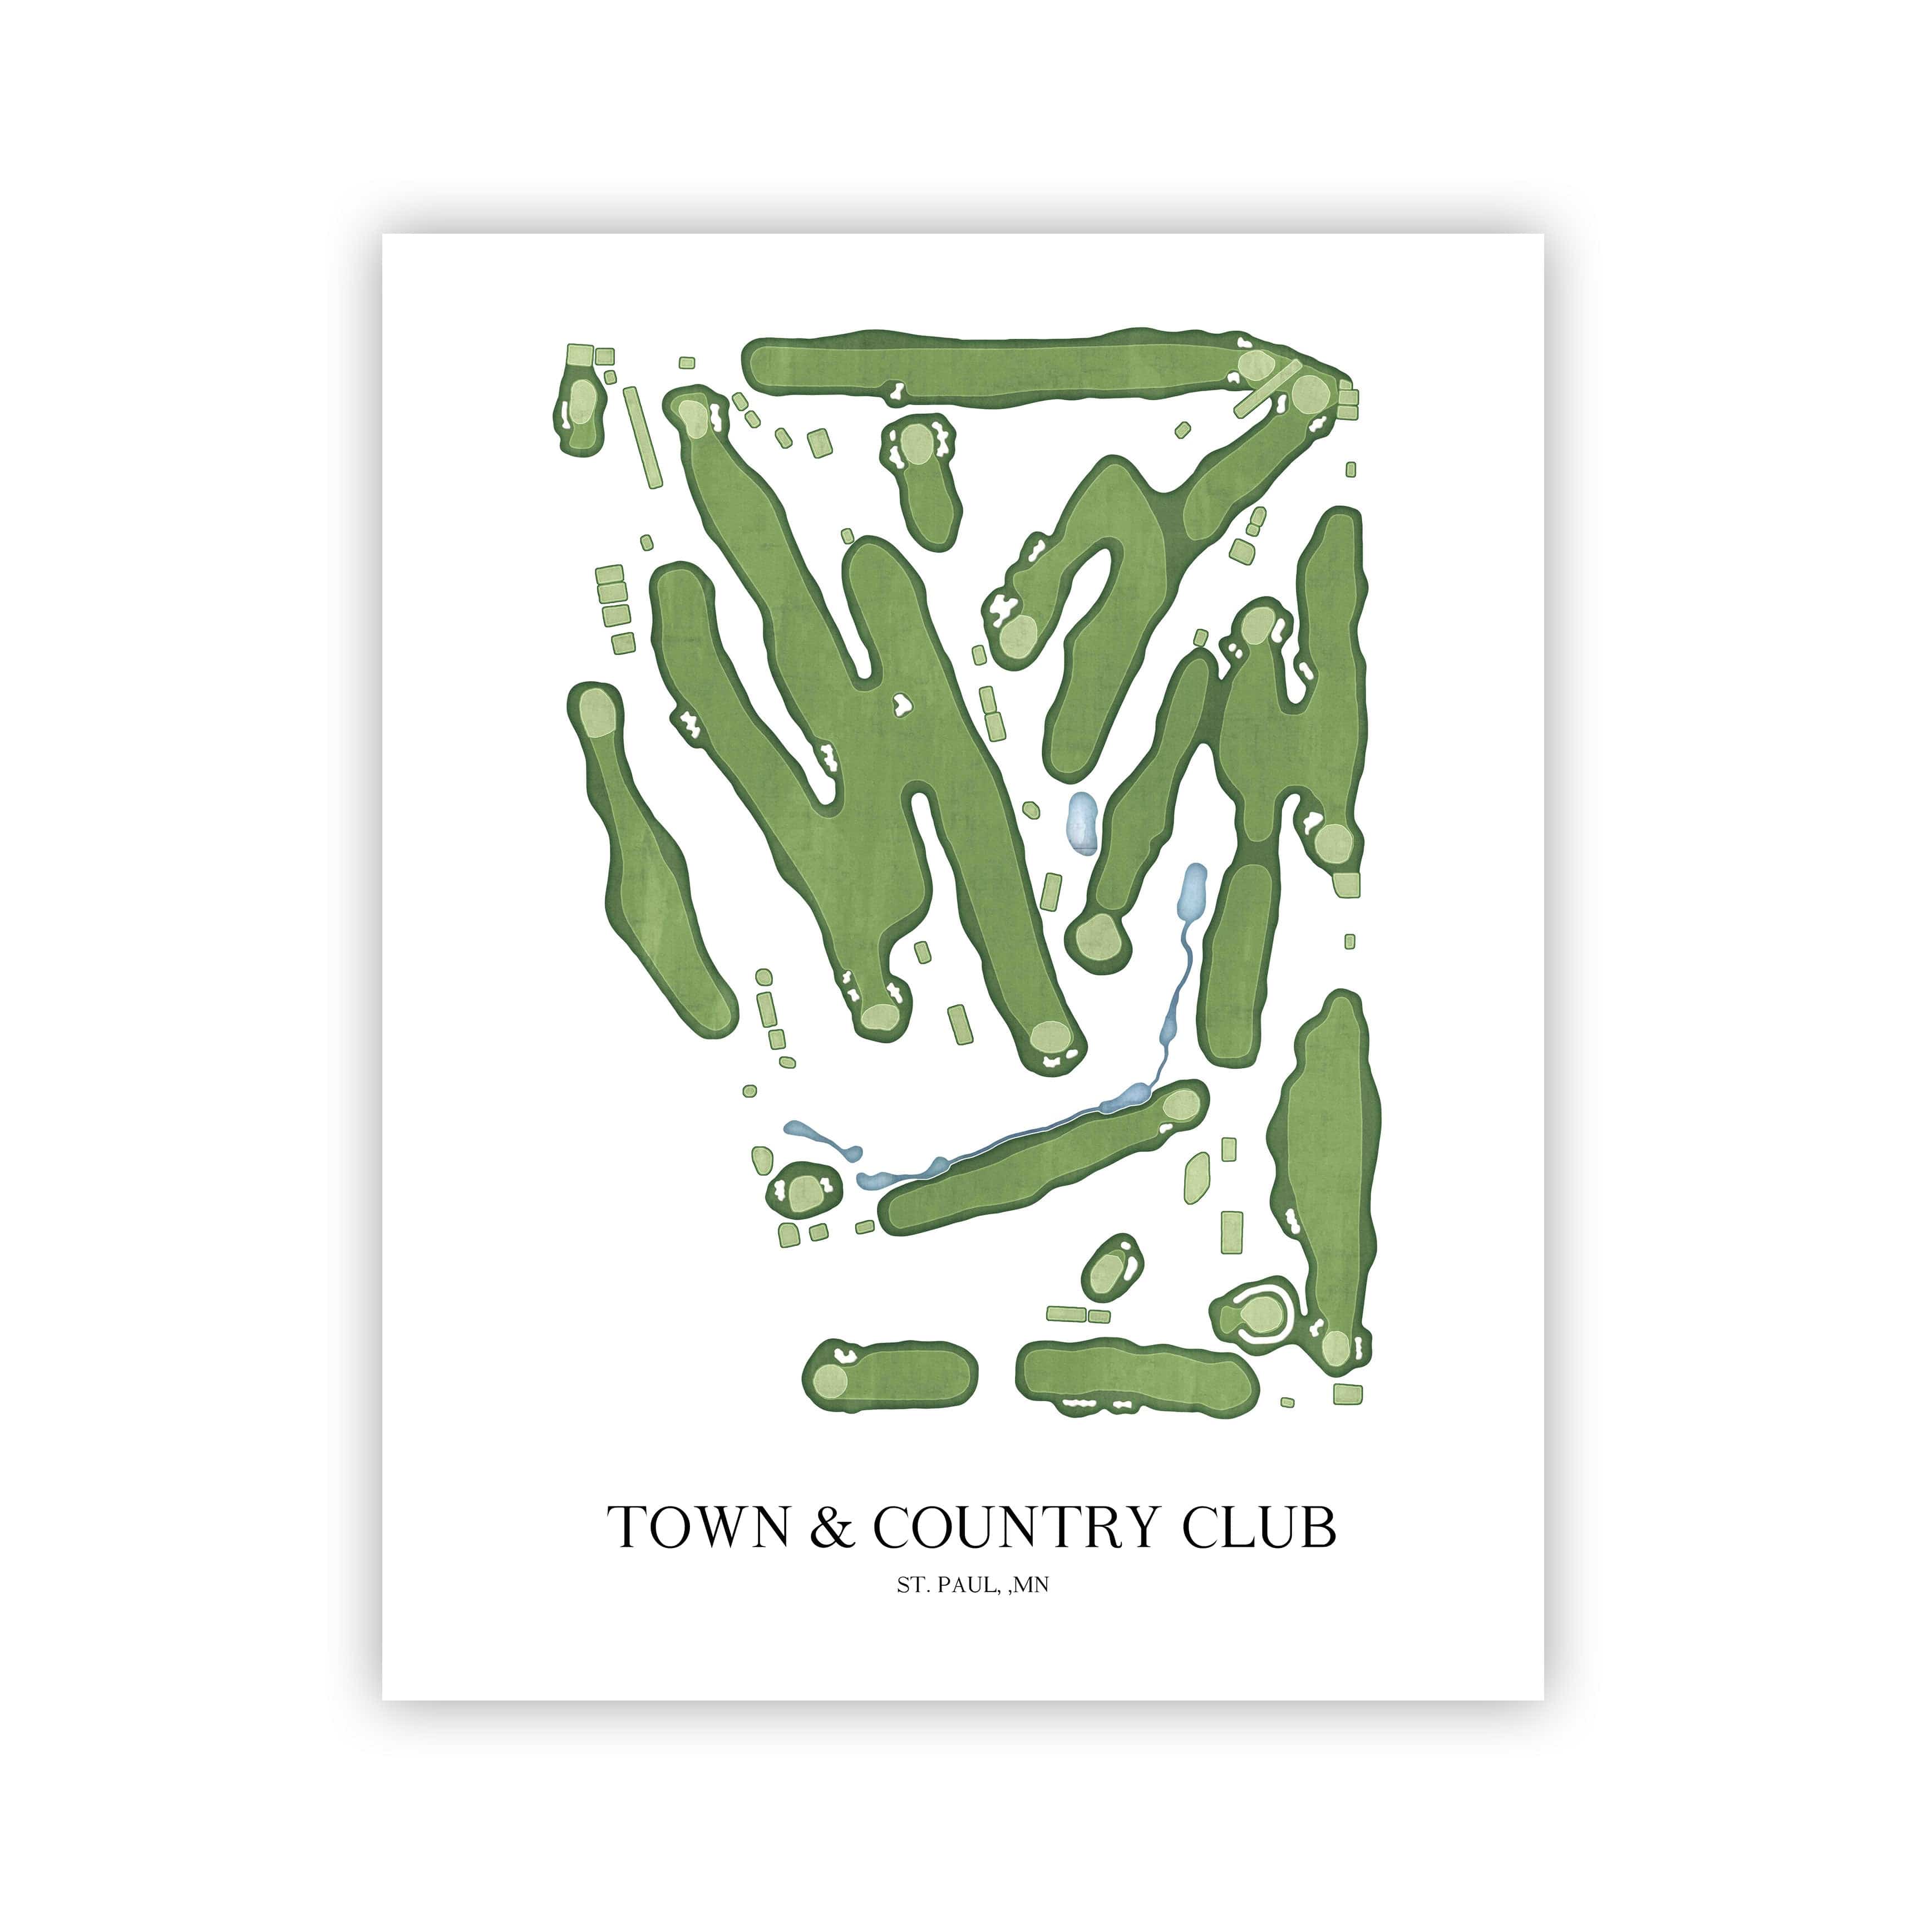 The 19th Hole Golf Shop - Golf Course Prints -  Town & Country Club Golf Course Map